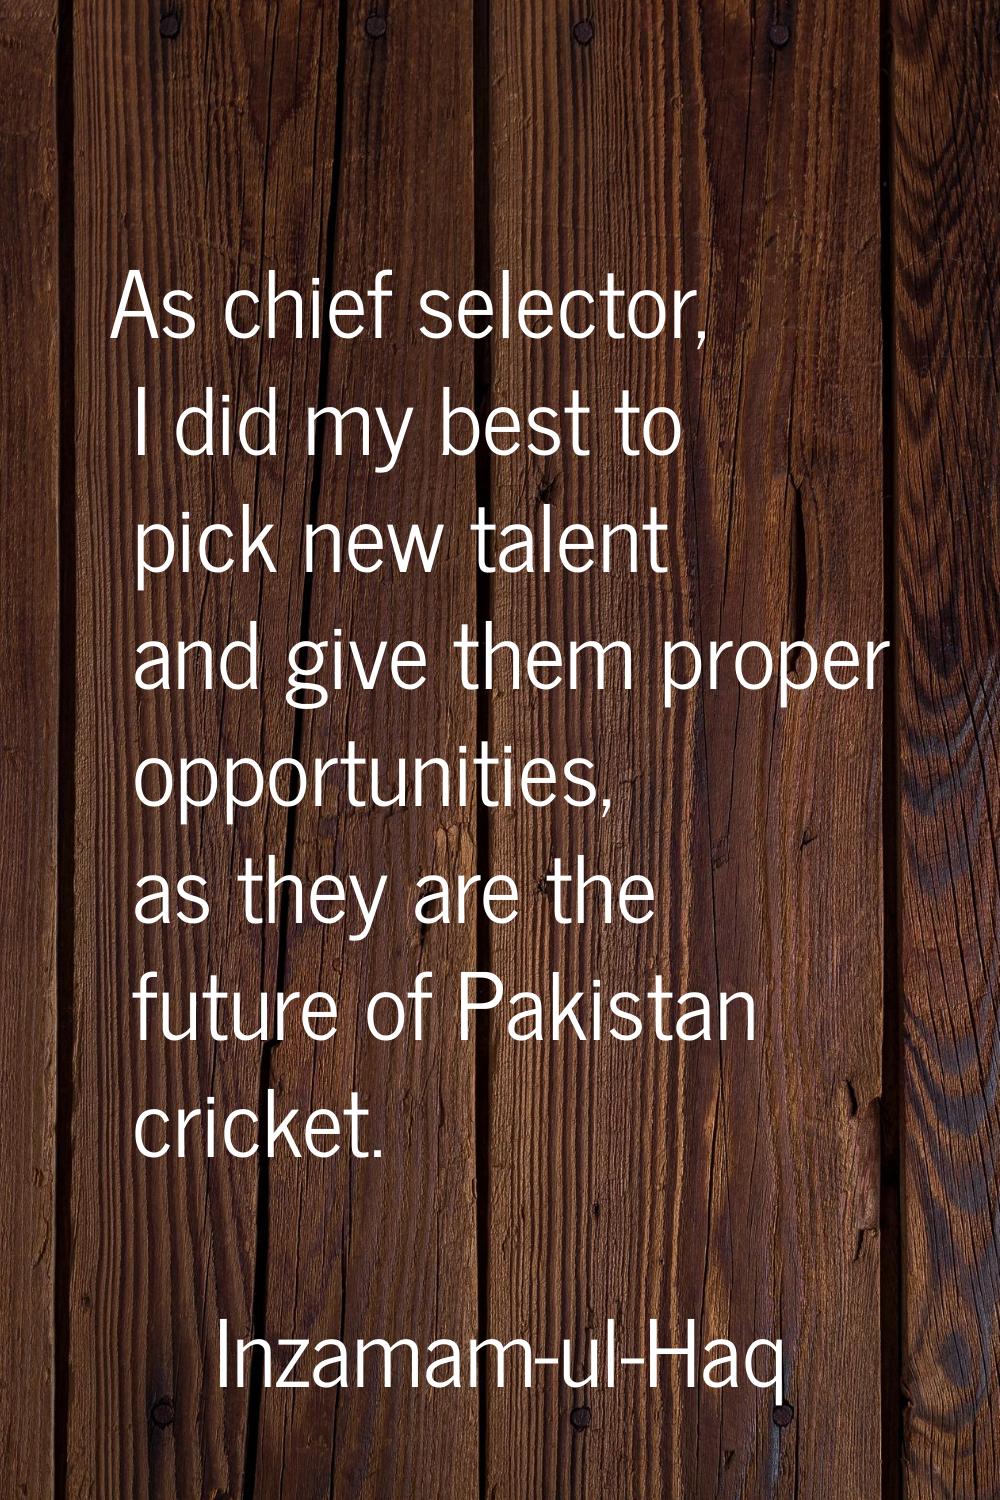 As chief selector, I did my best to pick new talent and give them proper opportunities, as they are